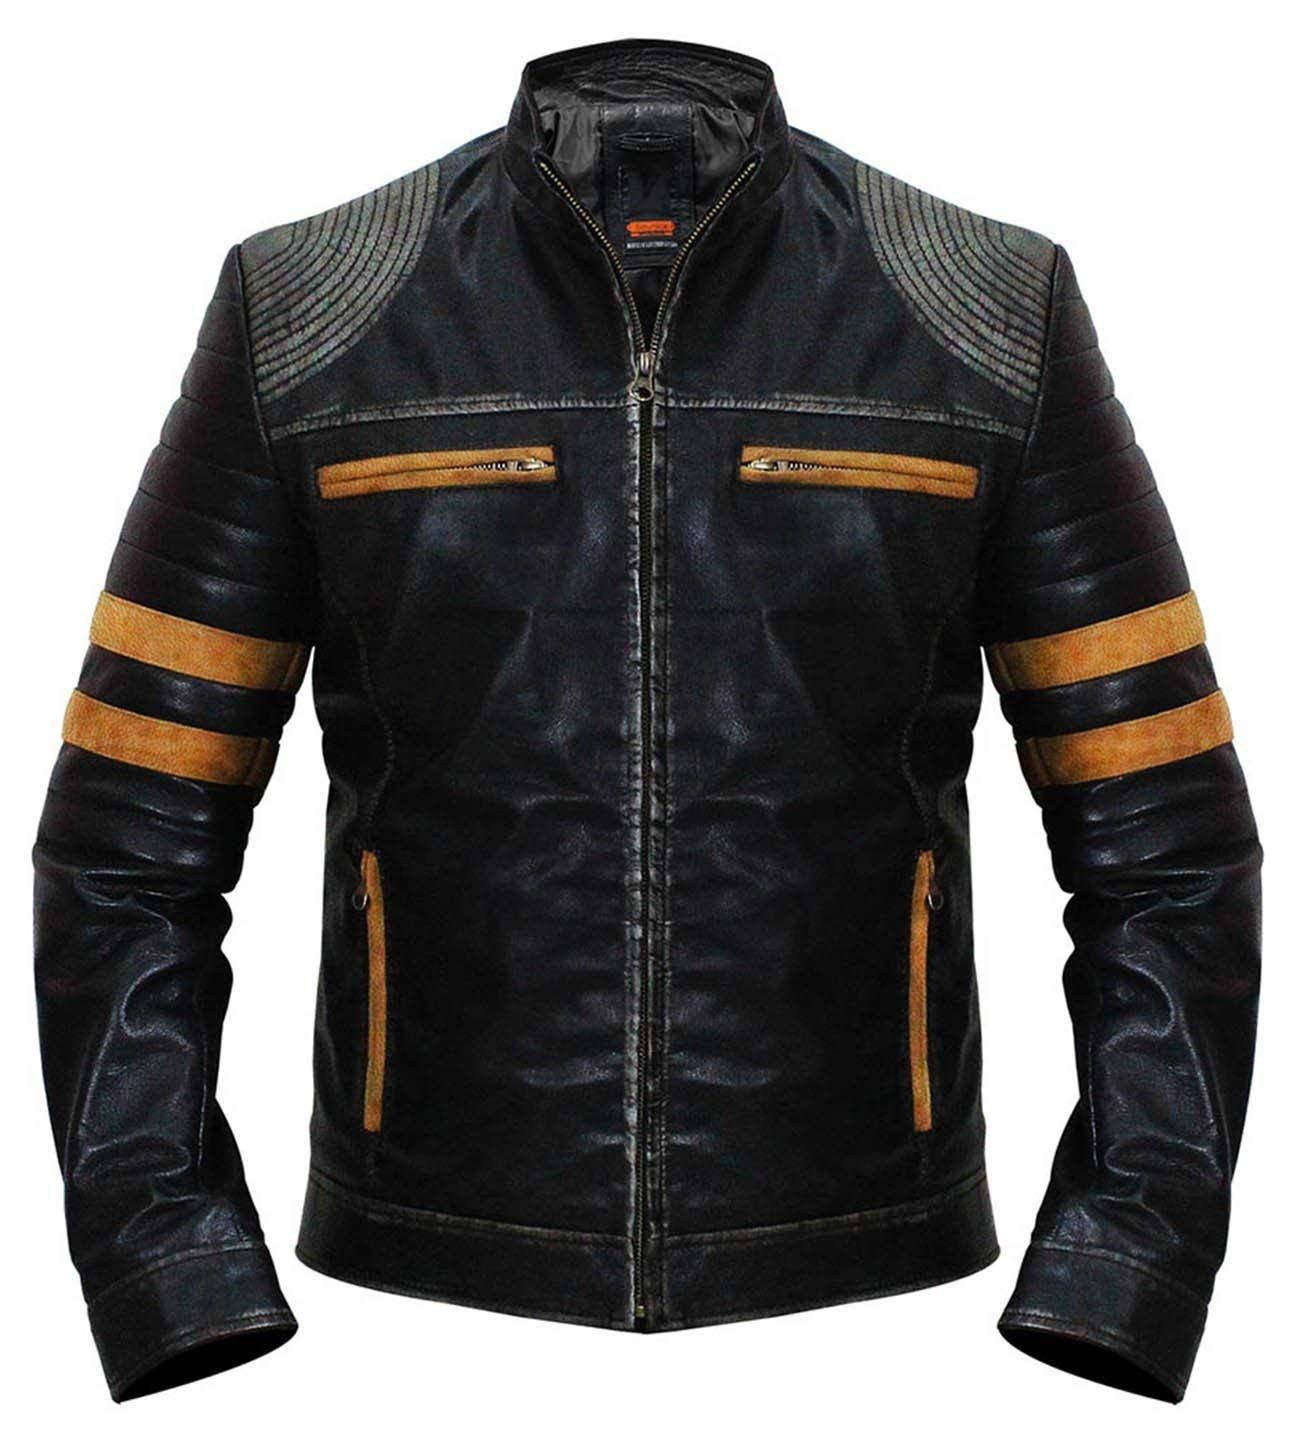 Motorcycle leather jacket For Man's || Leather jacket For Man 